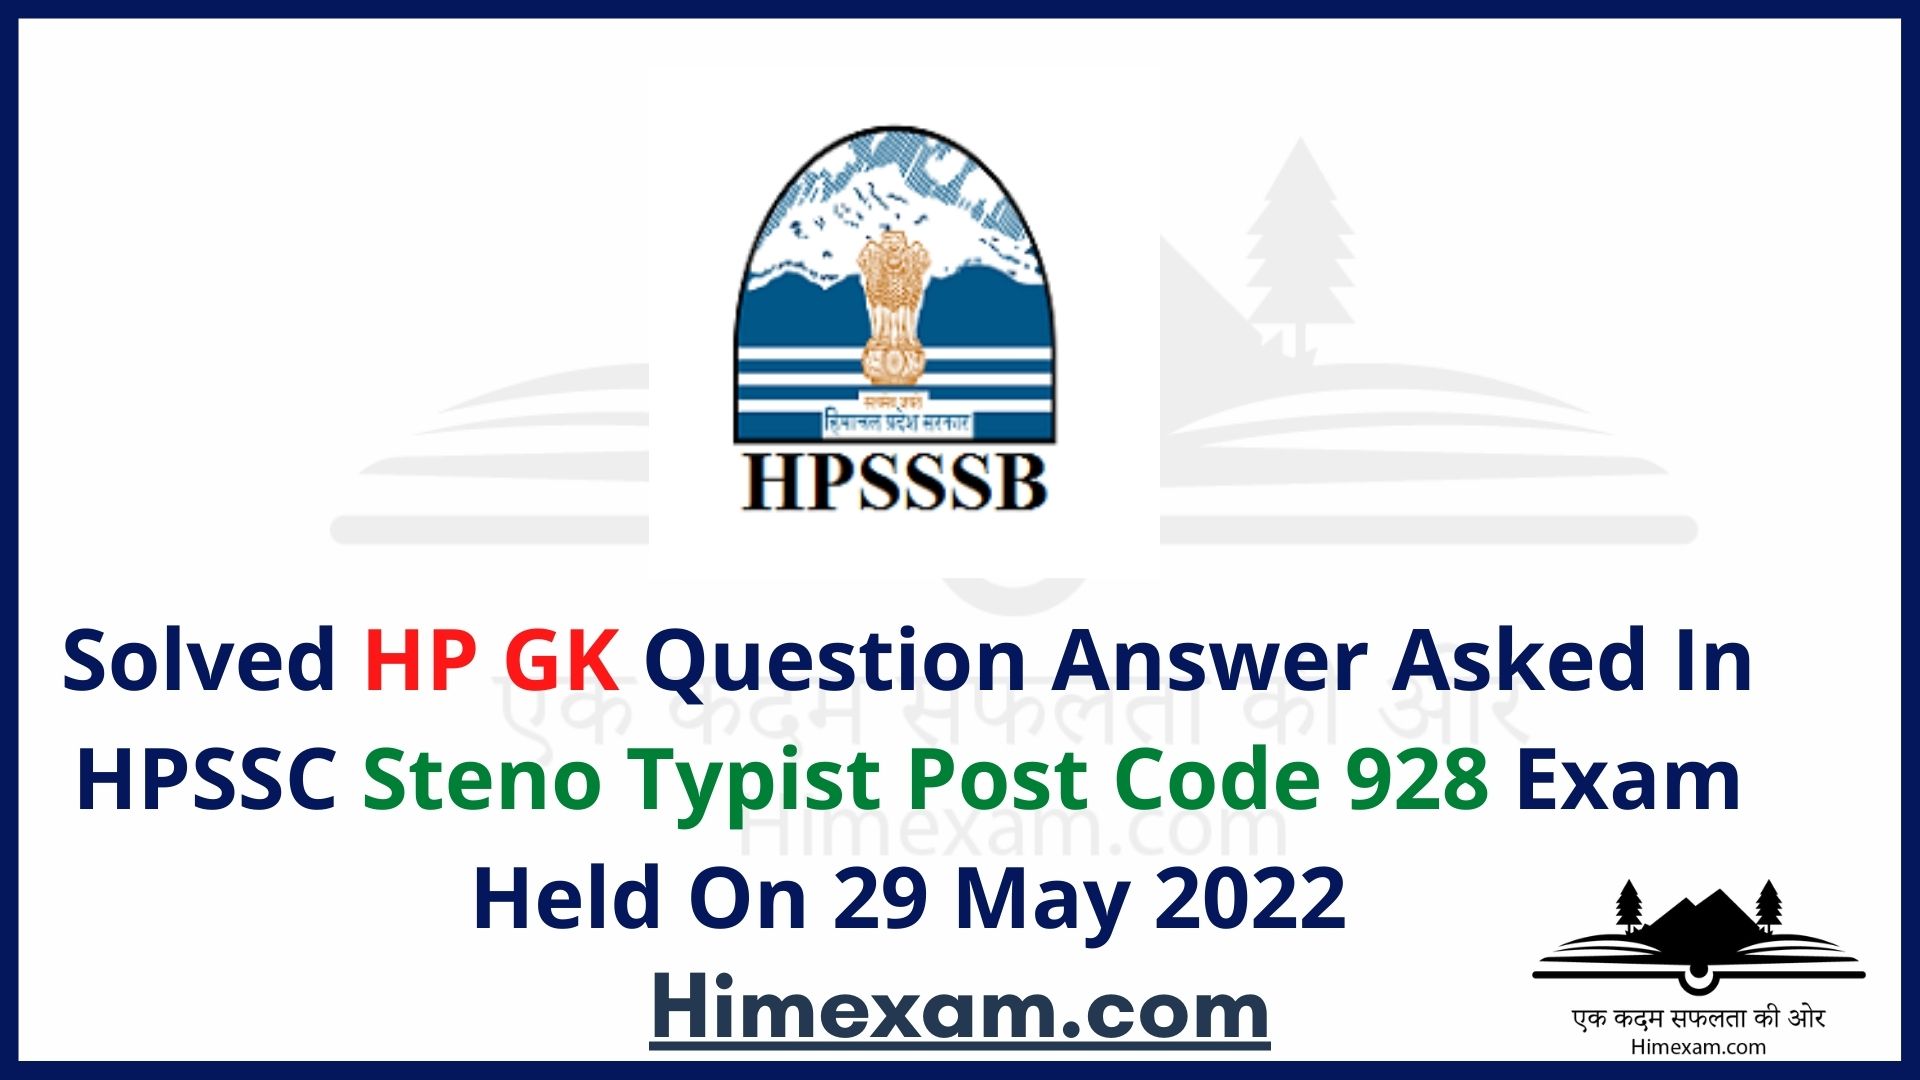 Solved HP GK Question Answer Asked In HPSSC Steno Typist Post Code 928 Exam Held On 29 May 2022